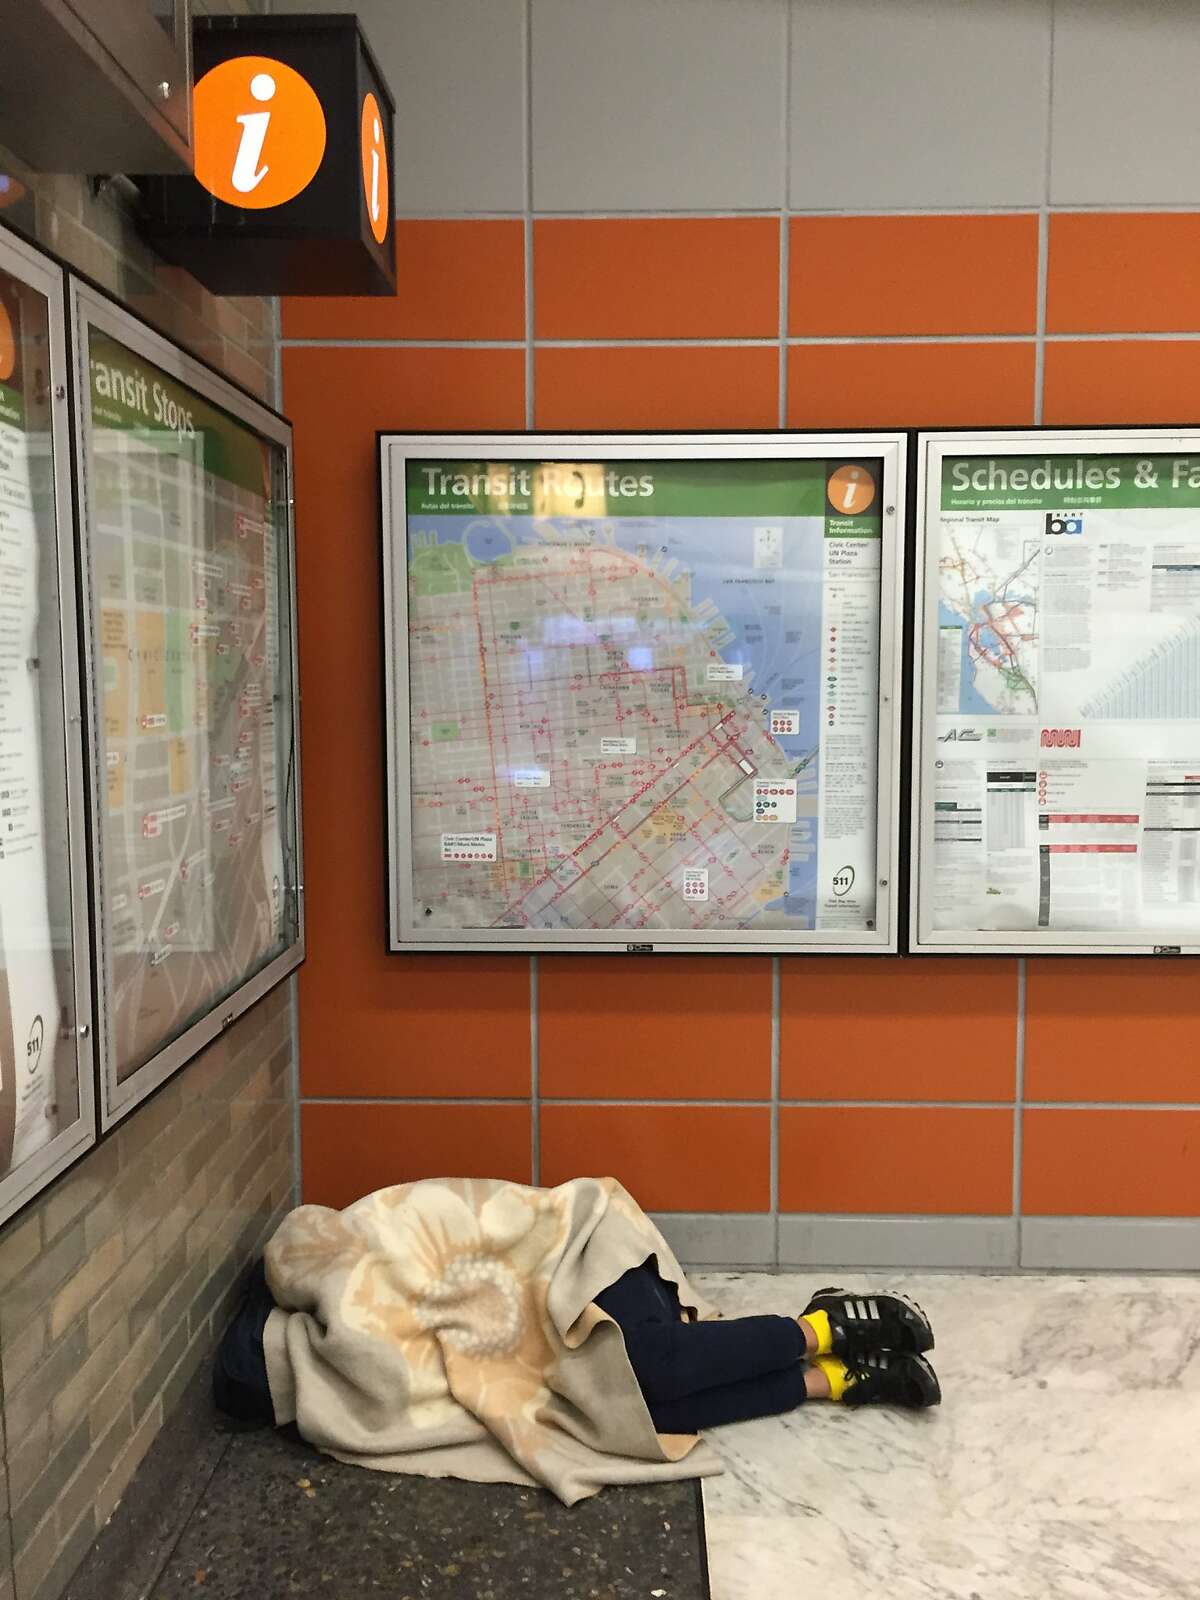 A homeless person sleeps it off inside the Civic Center BART station.